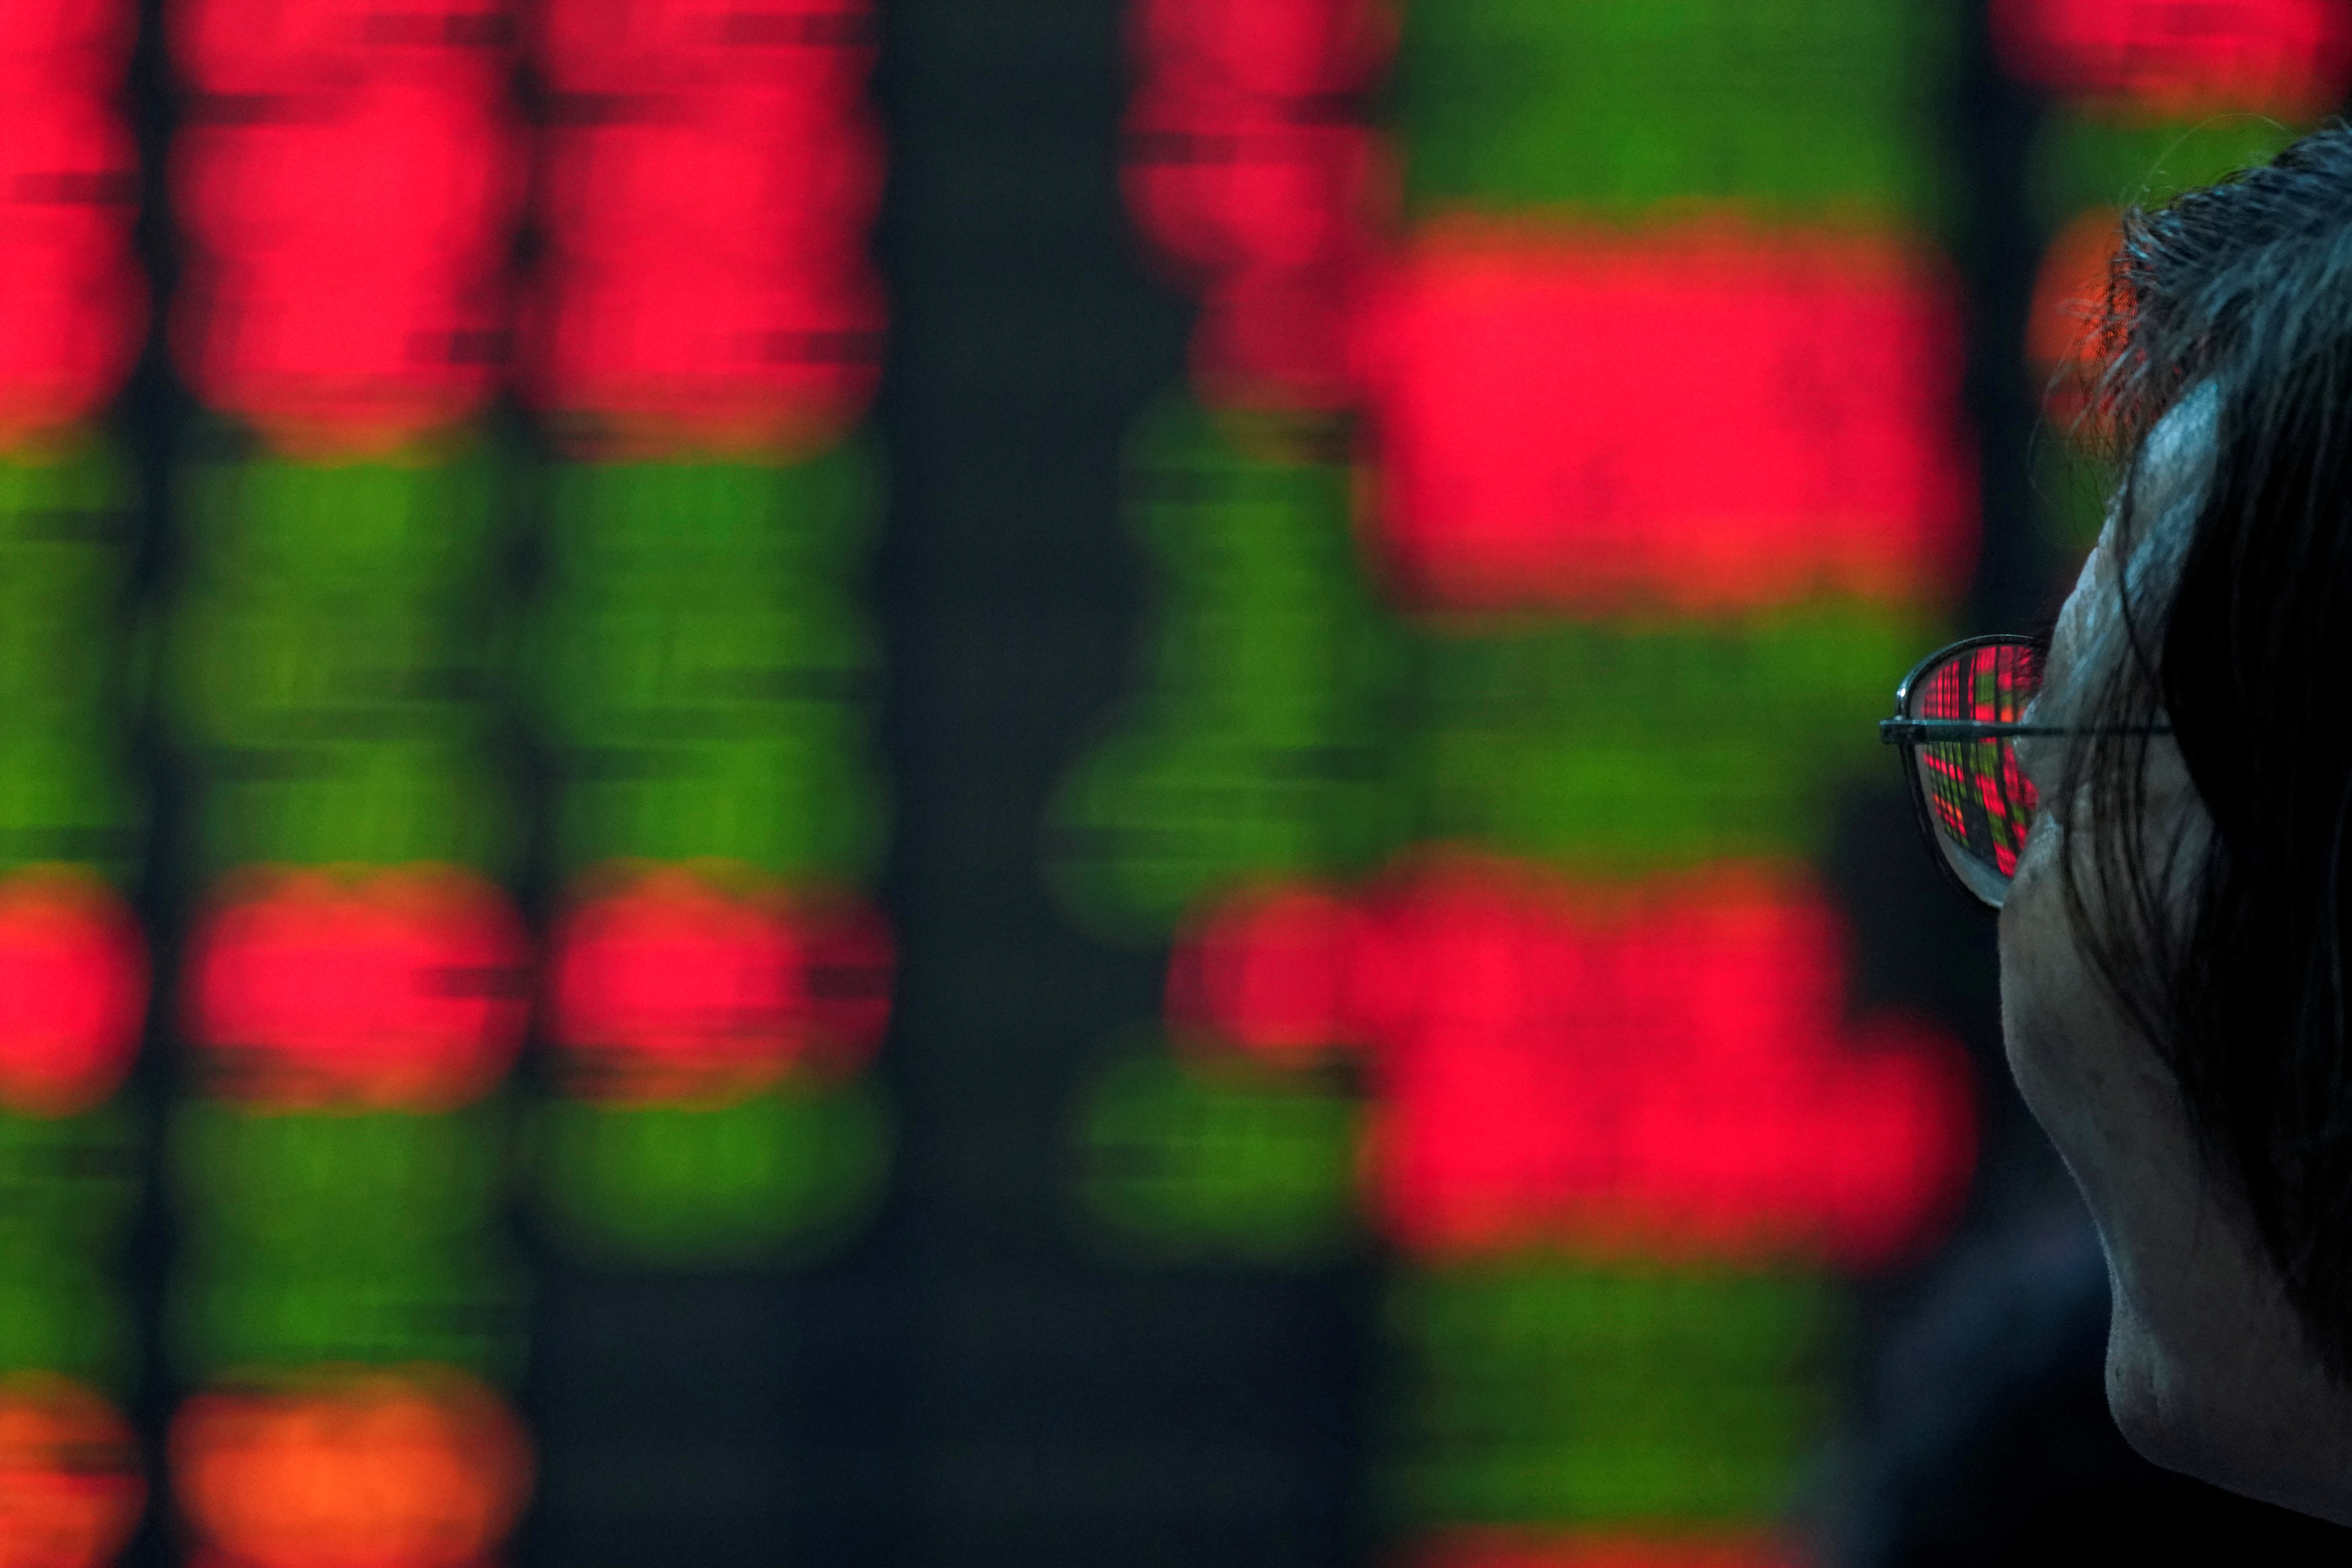 An investor looks at an electronic board showing stock information at a brokerage house in Shanghai